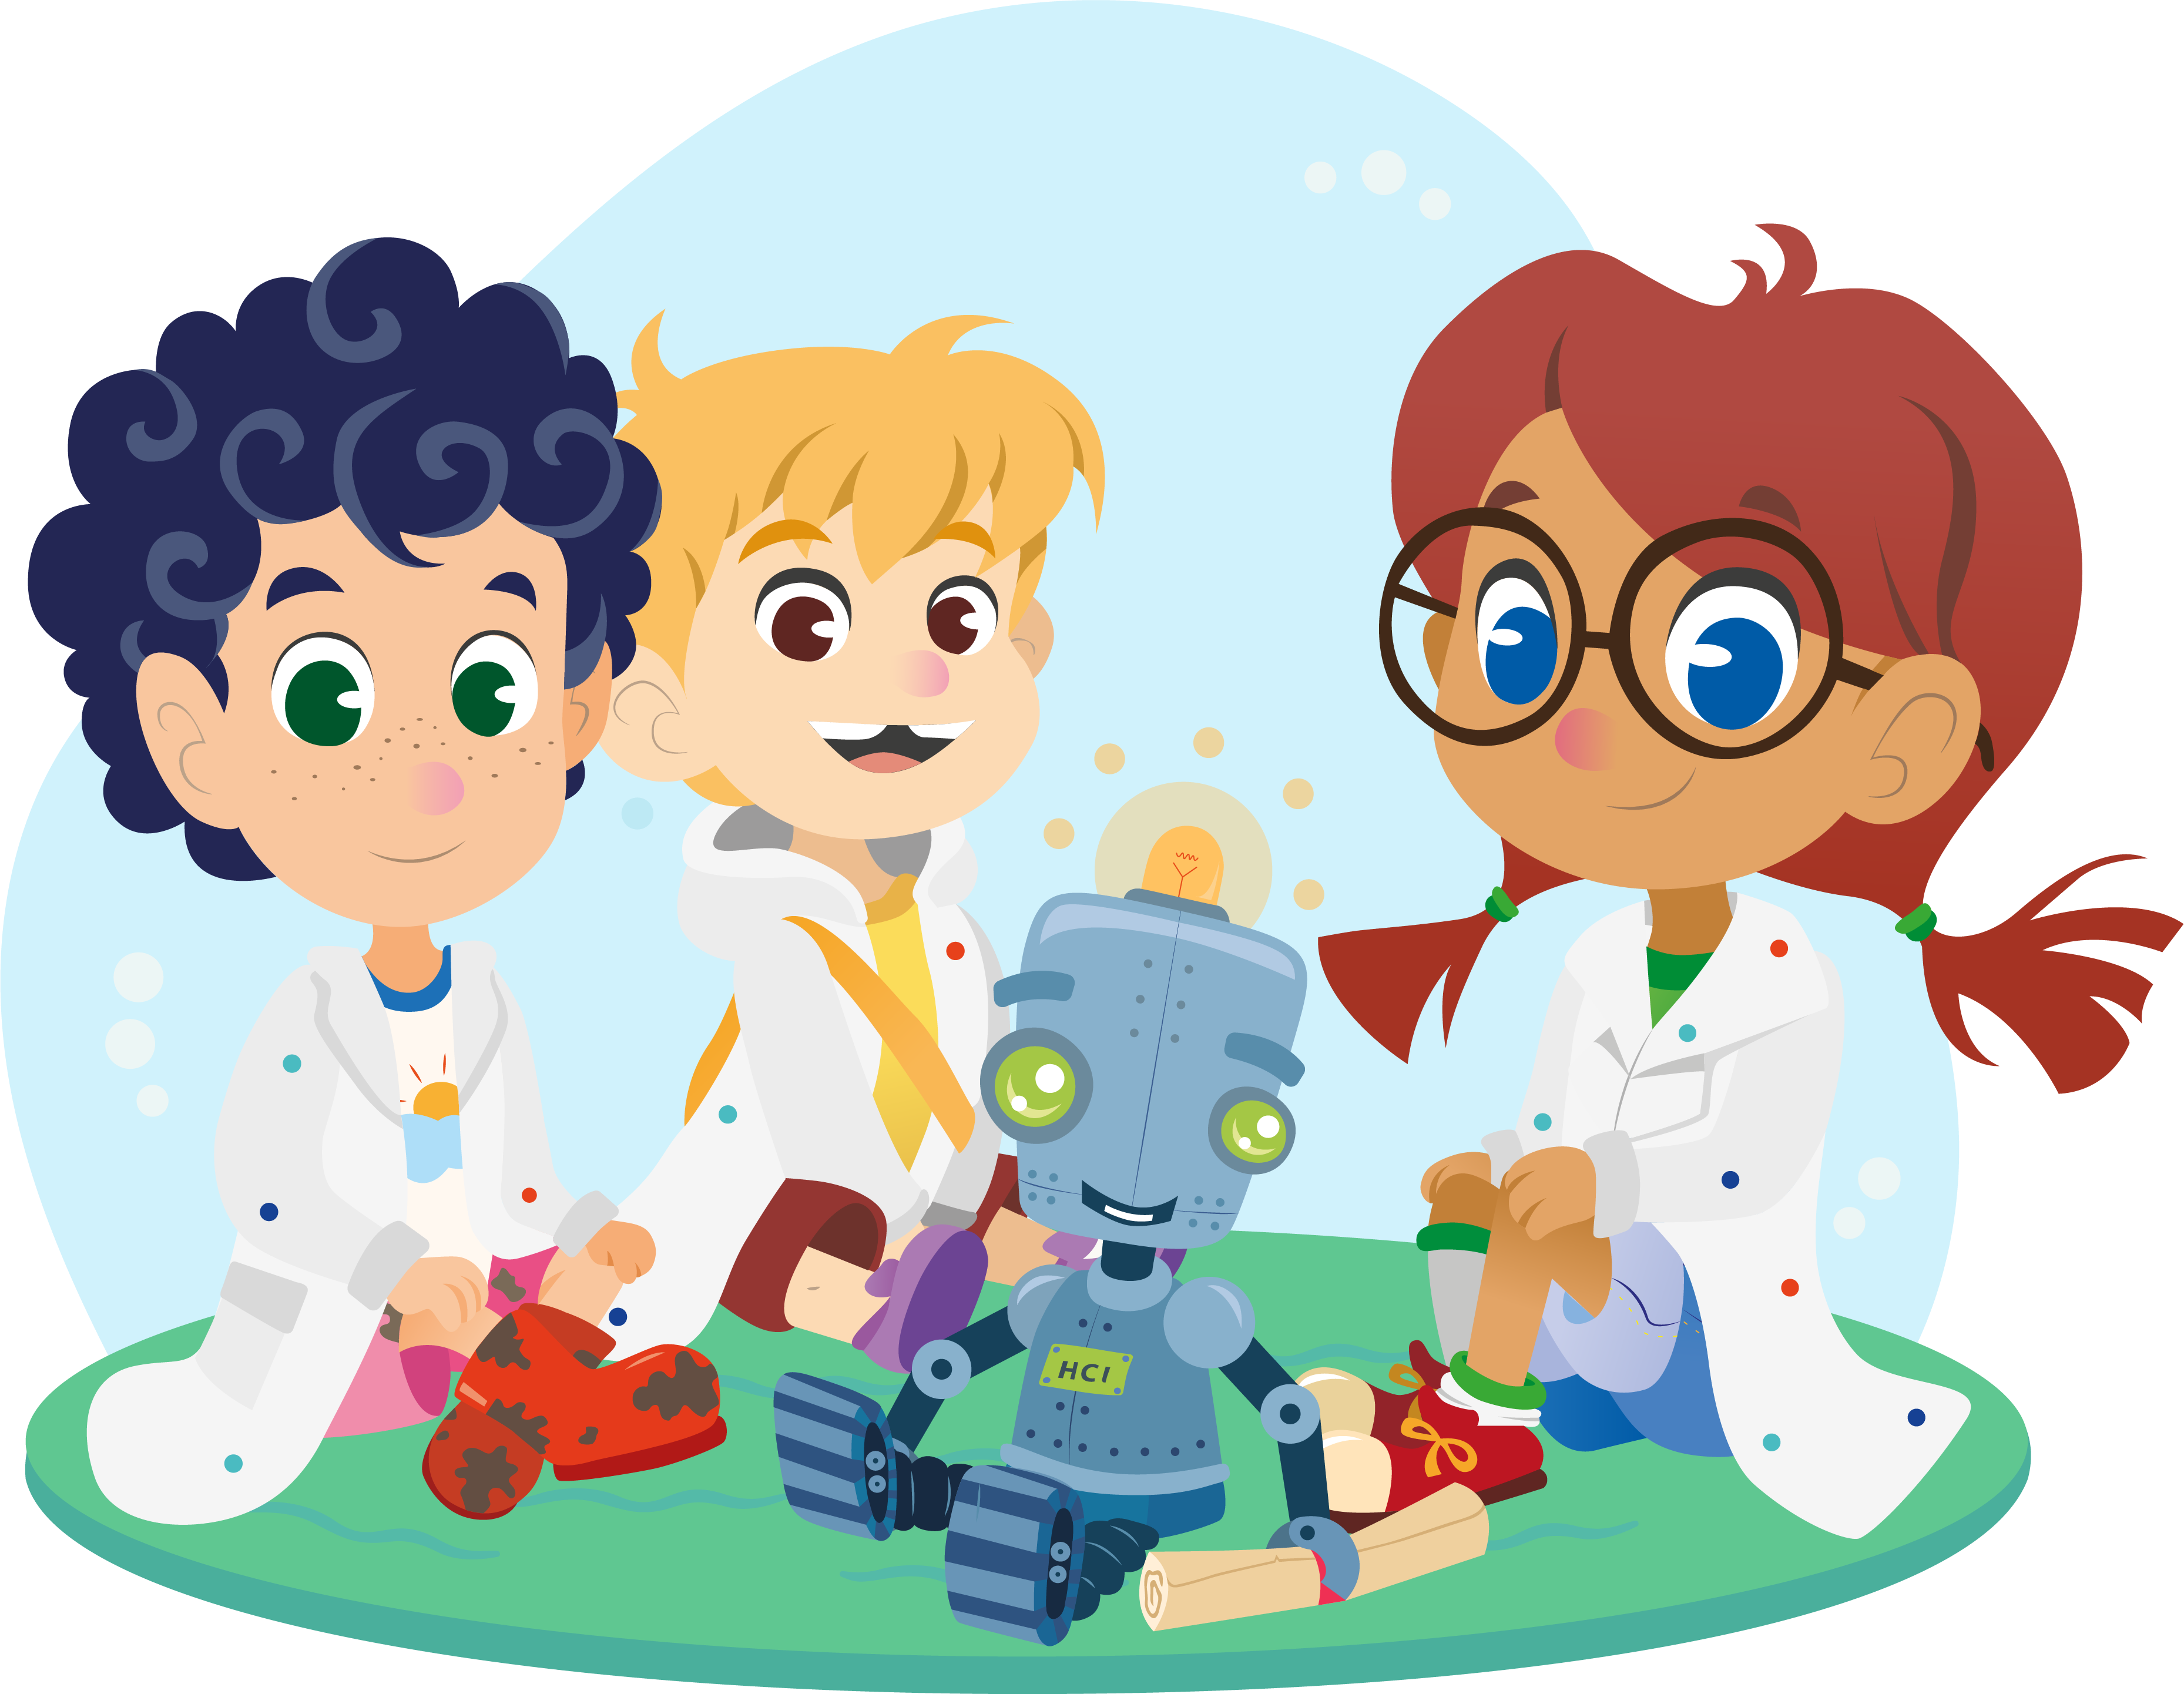 Kide Science characters sitting in a circle and smiling